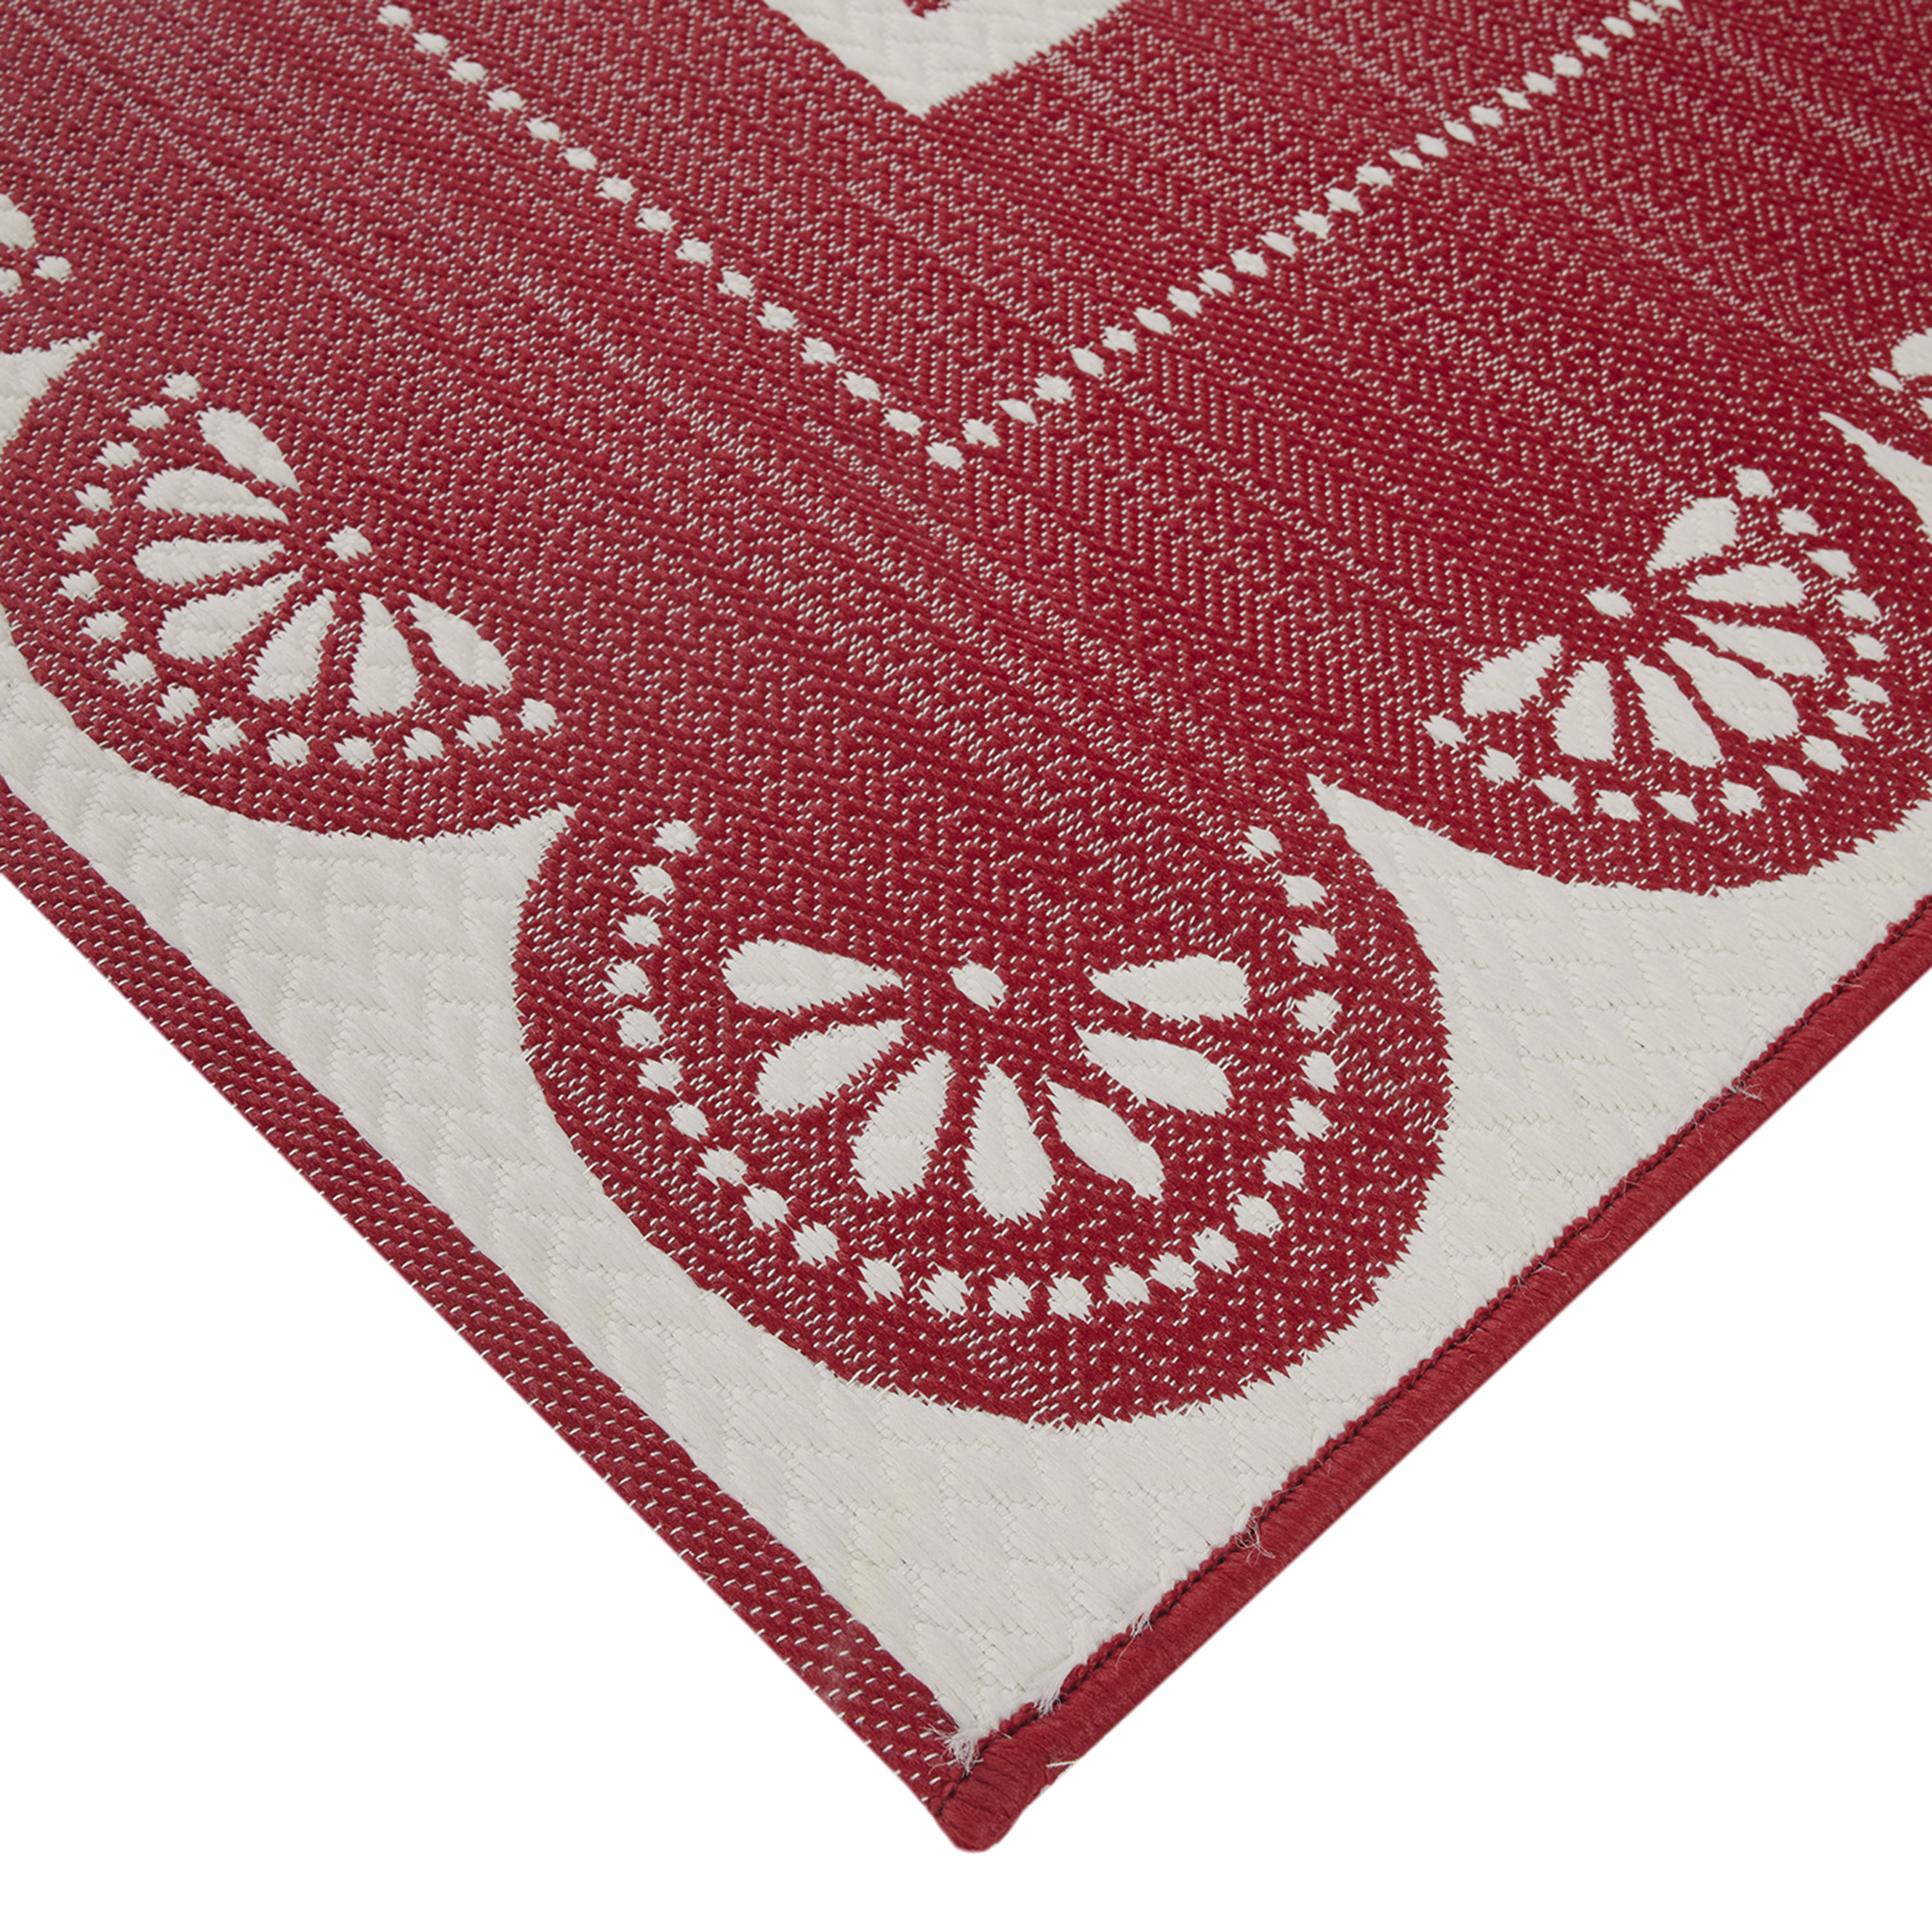 The Pioneer Woman Red Scallop Outdoor Rug, 5' x 7' - image 3 of 5